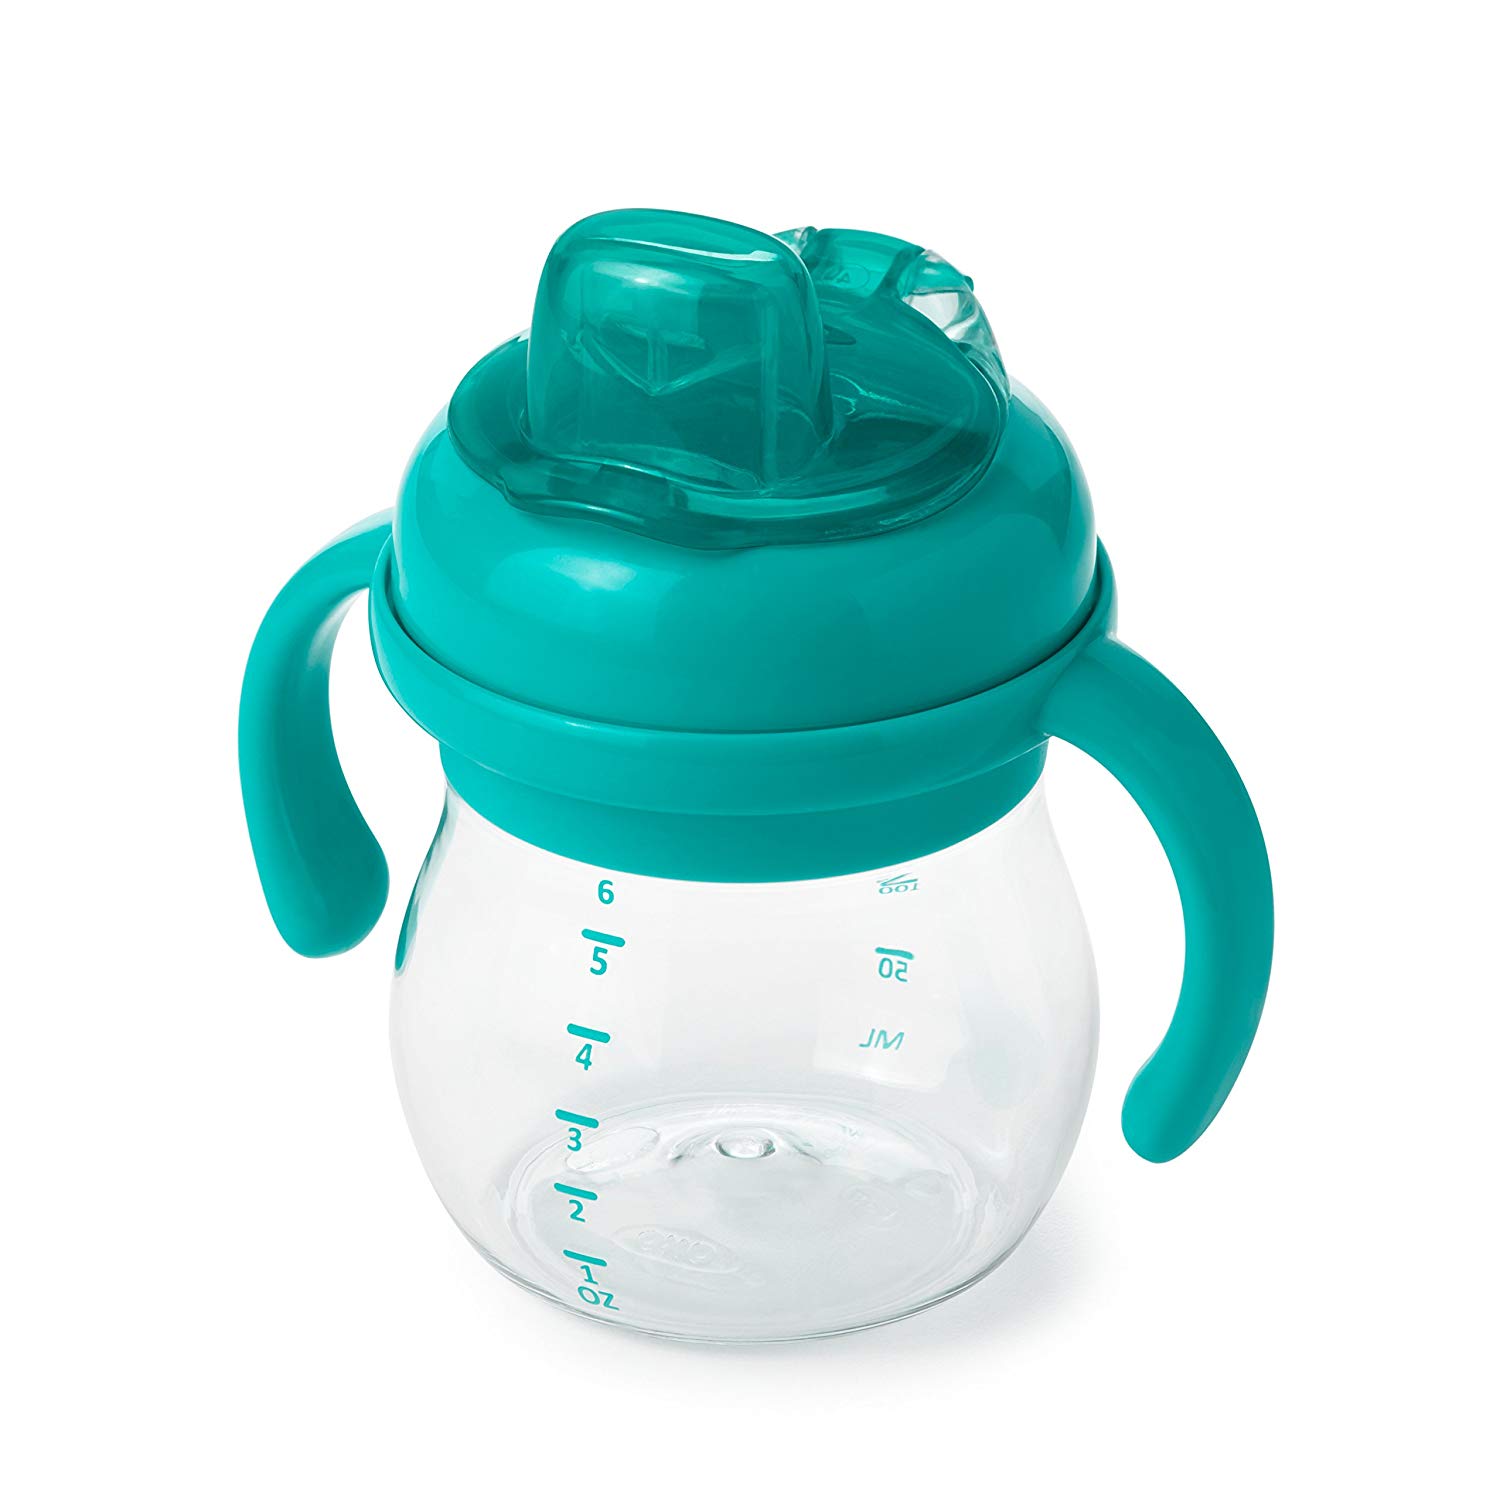 https://tickledbabies.com/wp-content/uploads/2020/03/OXO-Tot-Grow-Soft-Spout-Cup-With-Handles-6-Oz-Teal-Image01.jpg